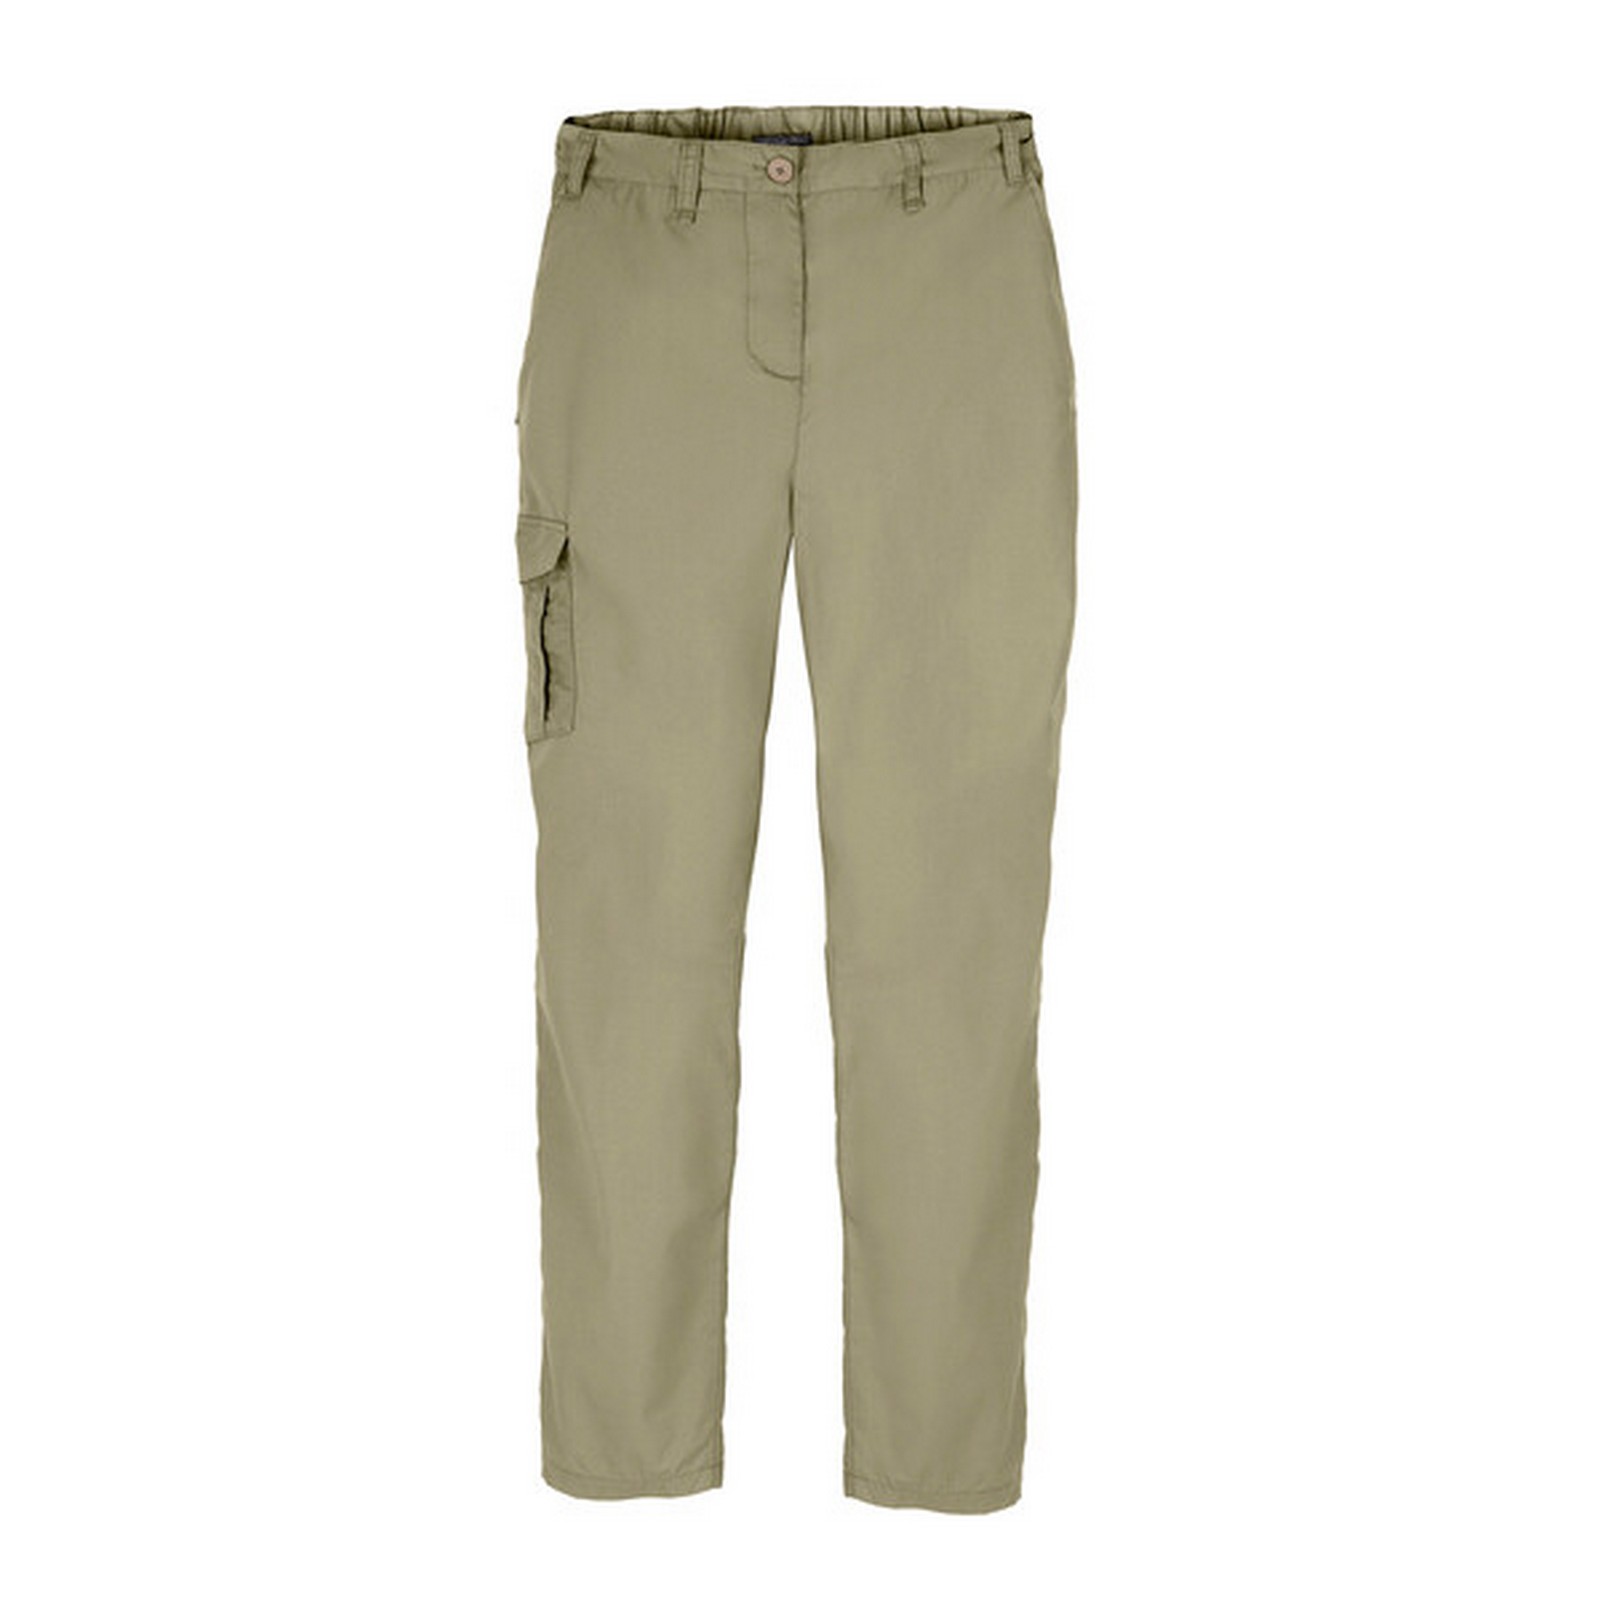 Craghoppers Kiwi II Classic trousers ladies | WISE Worksafe